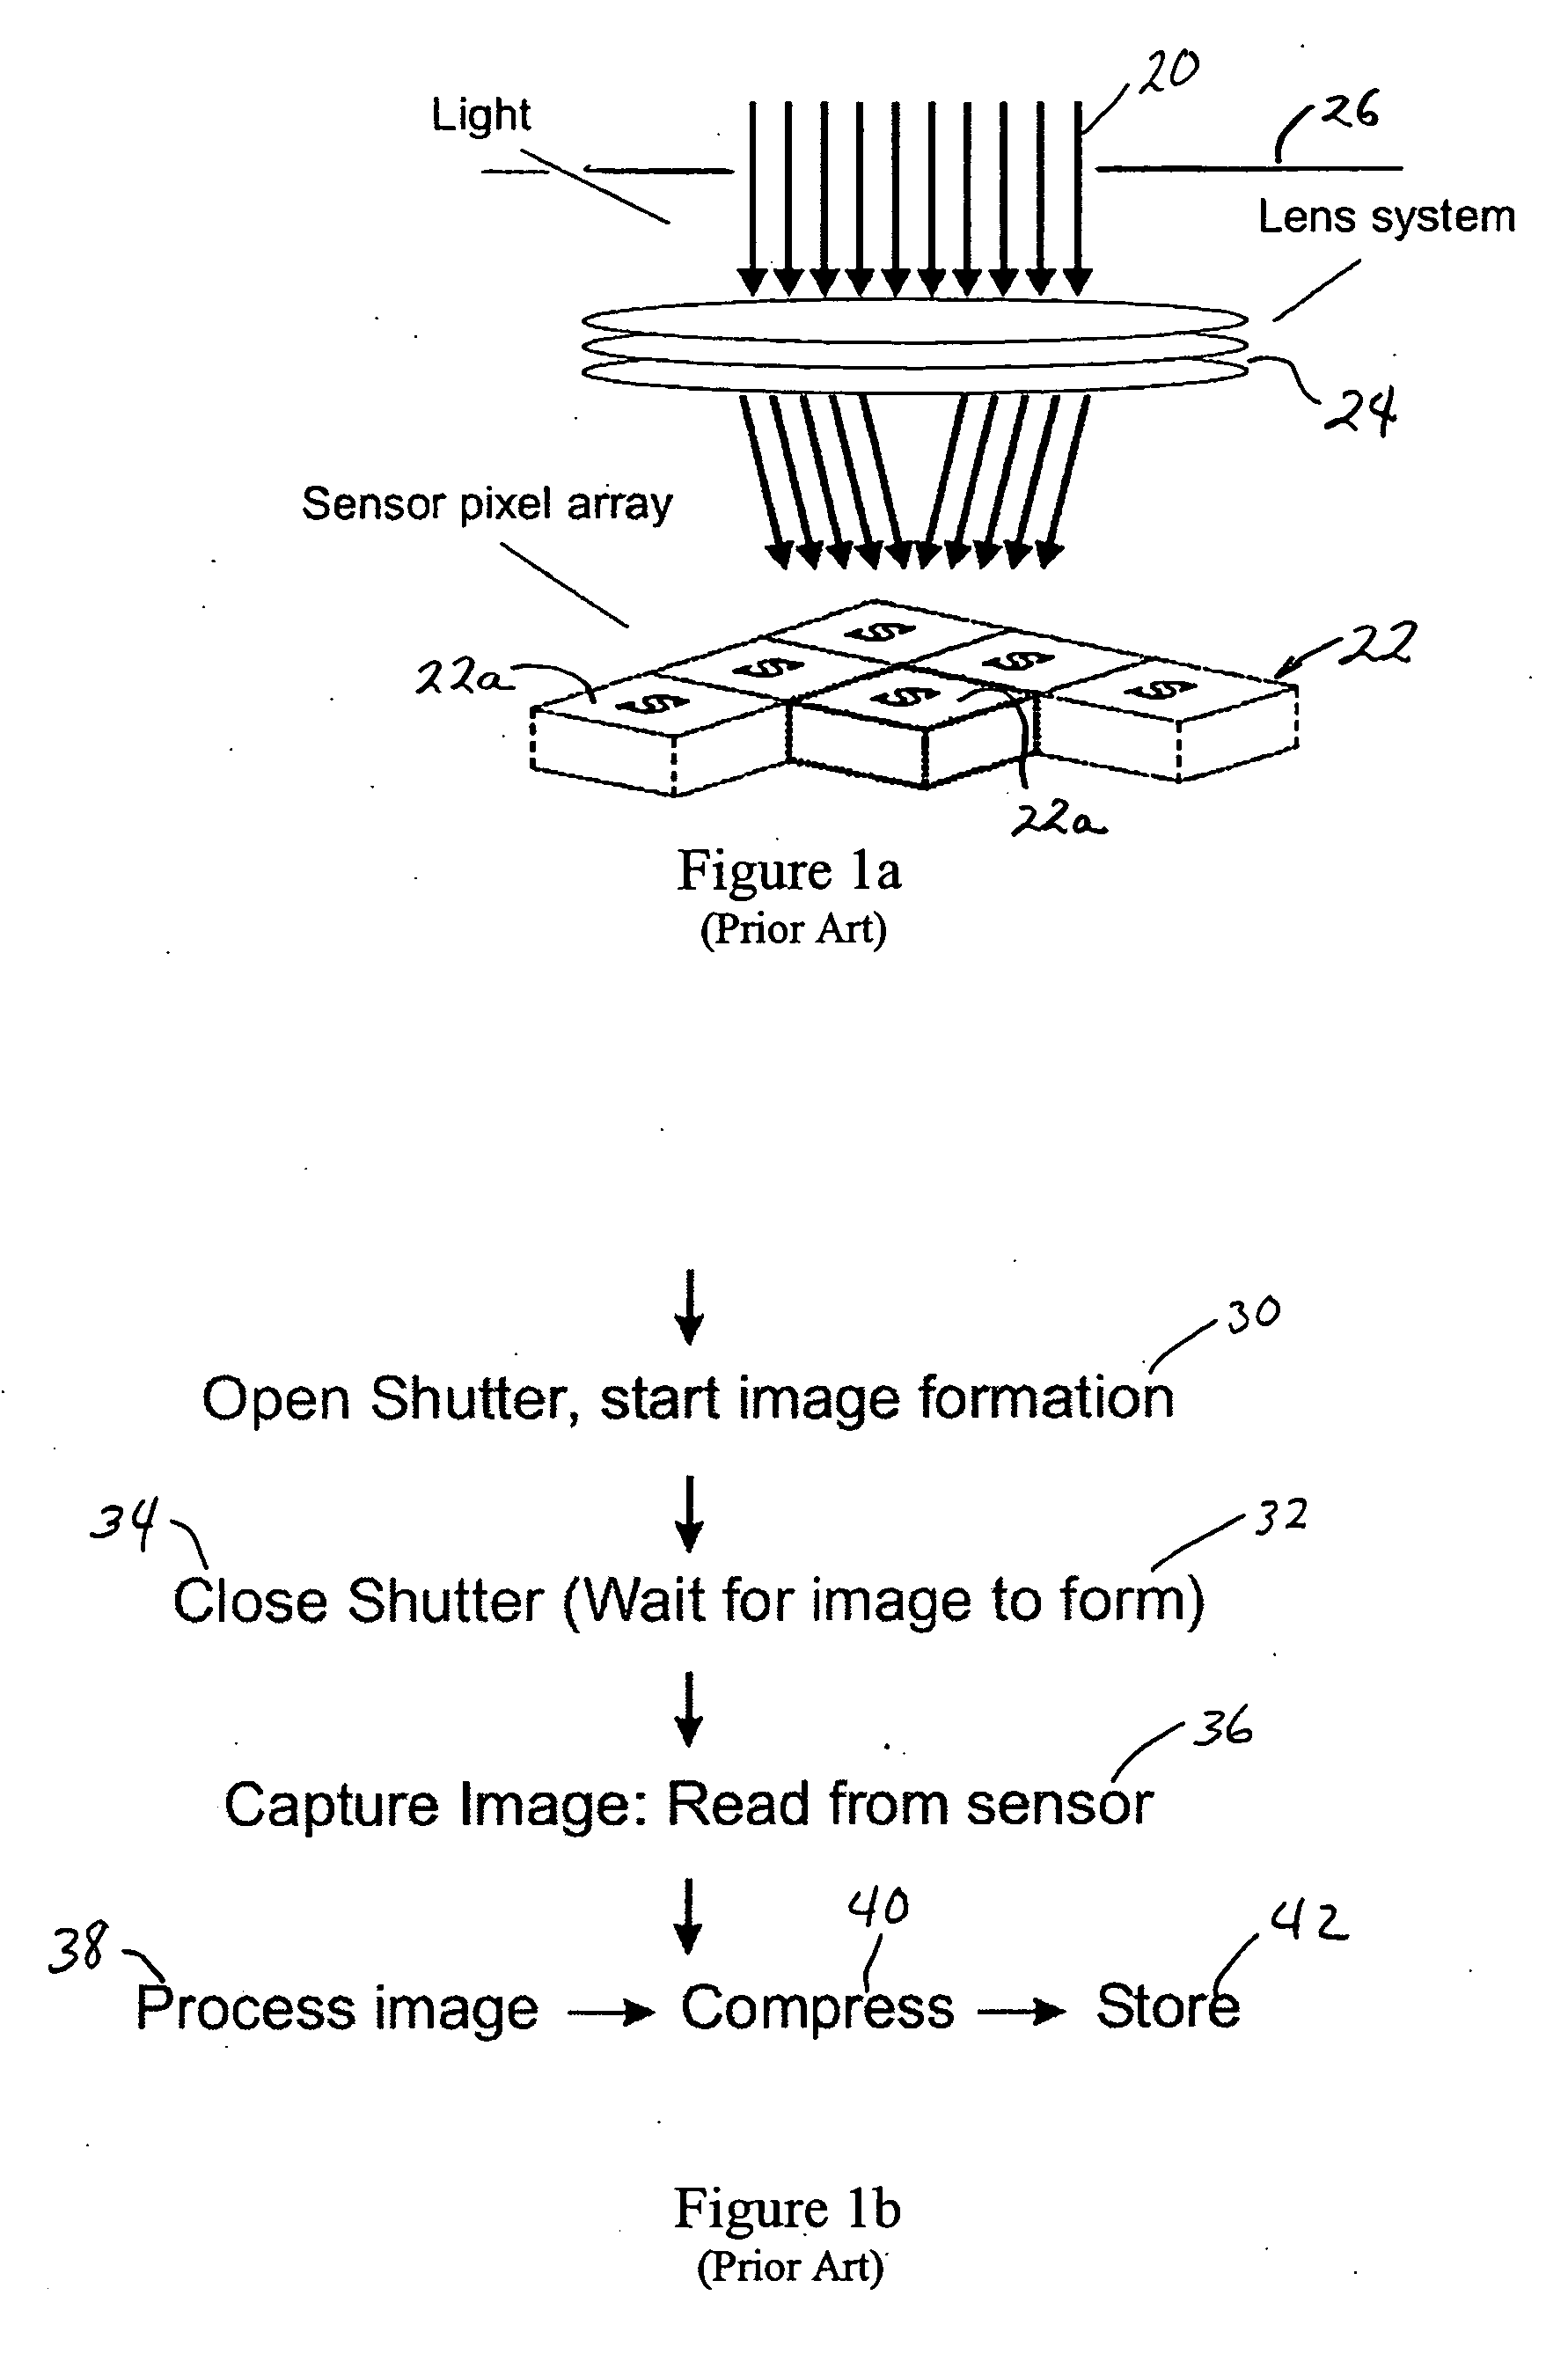 Method and device for sensor level image distortion abatement